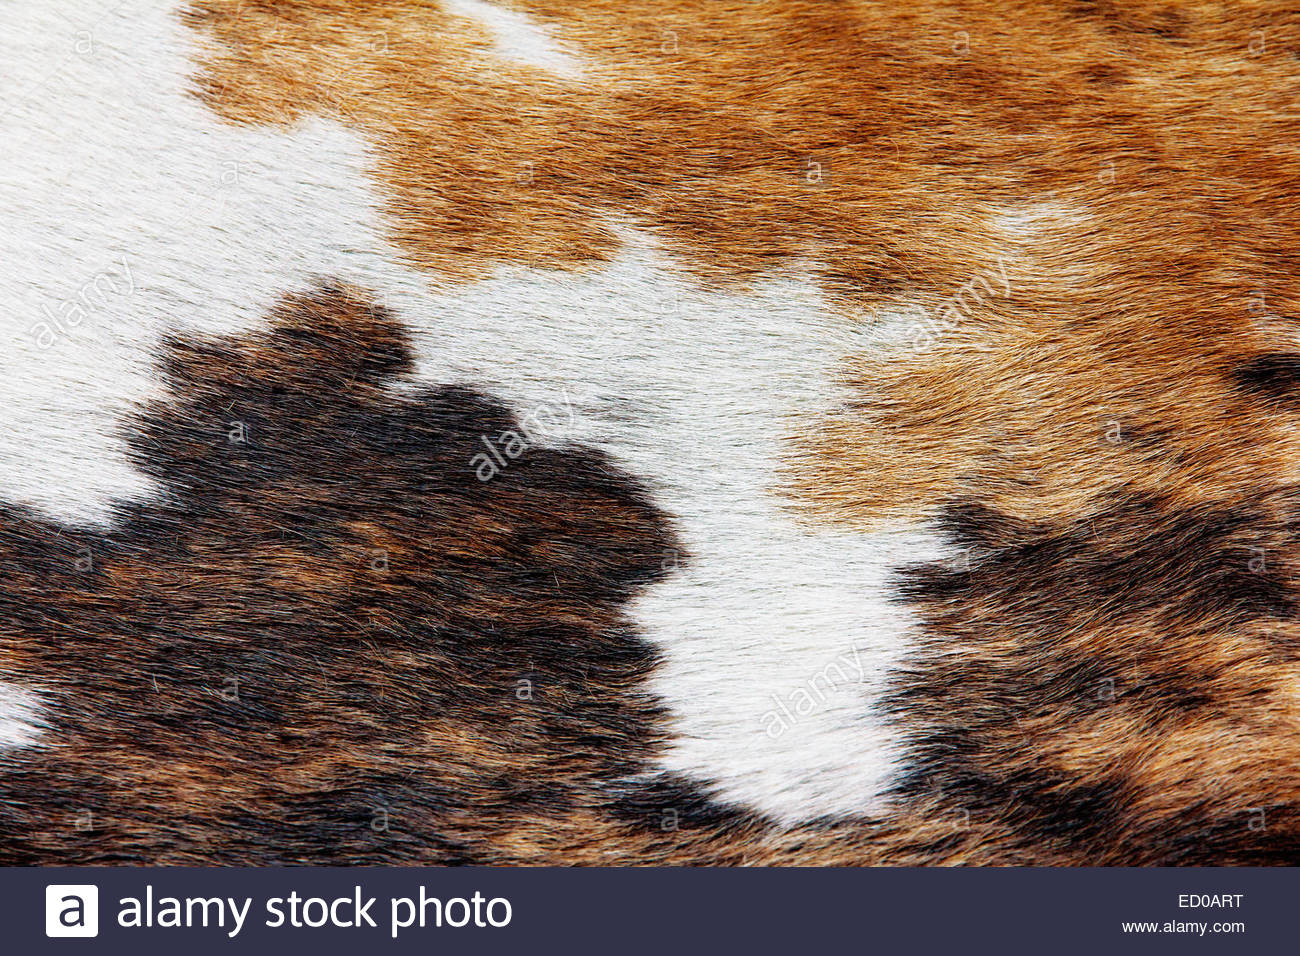 Cowhide stock image Image of background western hanging  1563673